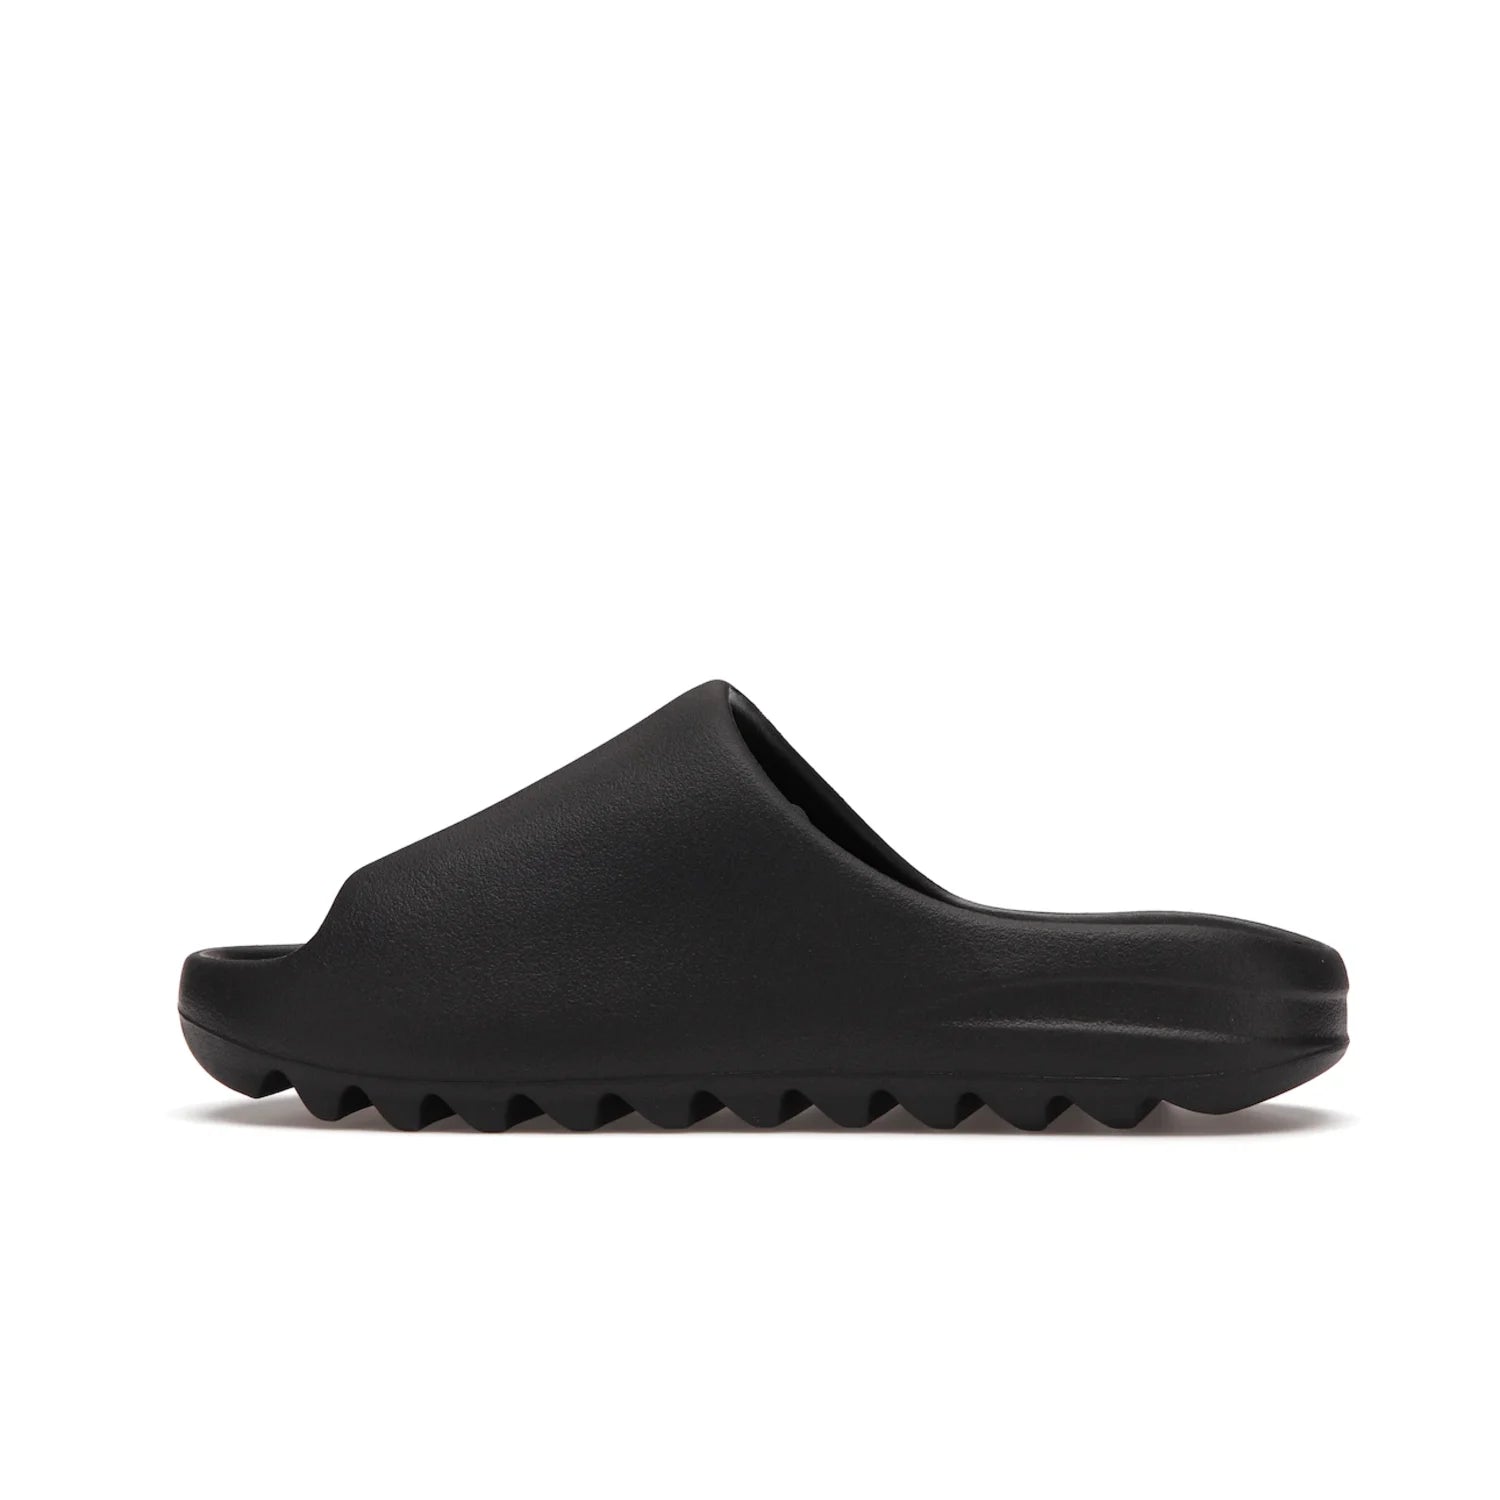 adidas Yeezy Slide Onyx - Image 20 - Only at www.BallersClubKickz.com - Step into comfort and style with the adidas Yeezy Slide Onyx. Featuring foam construction, an all-black colorway and a grooved outsole for stability and responsiveness, this versatile slide is a must-have for your collection.